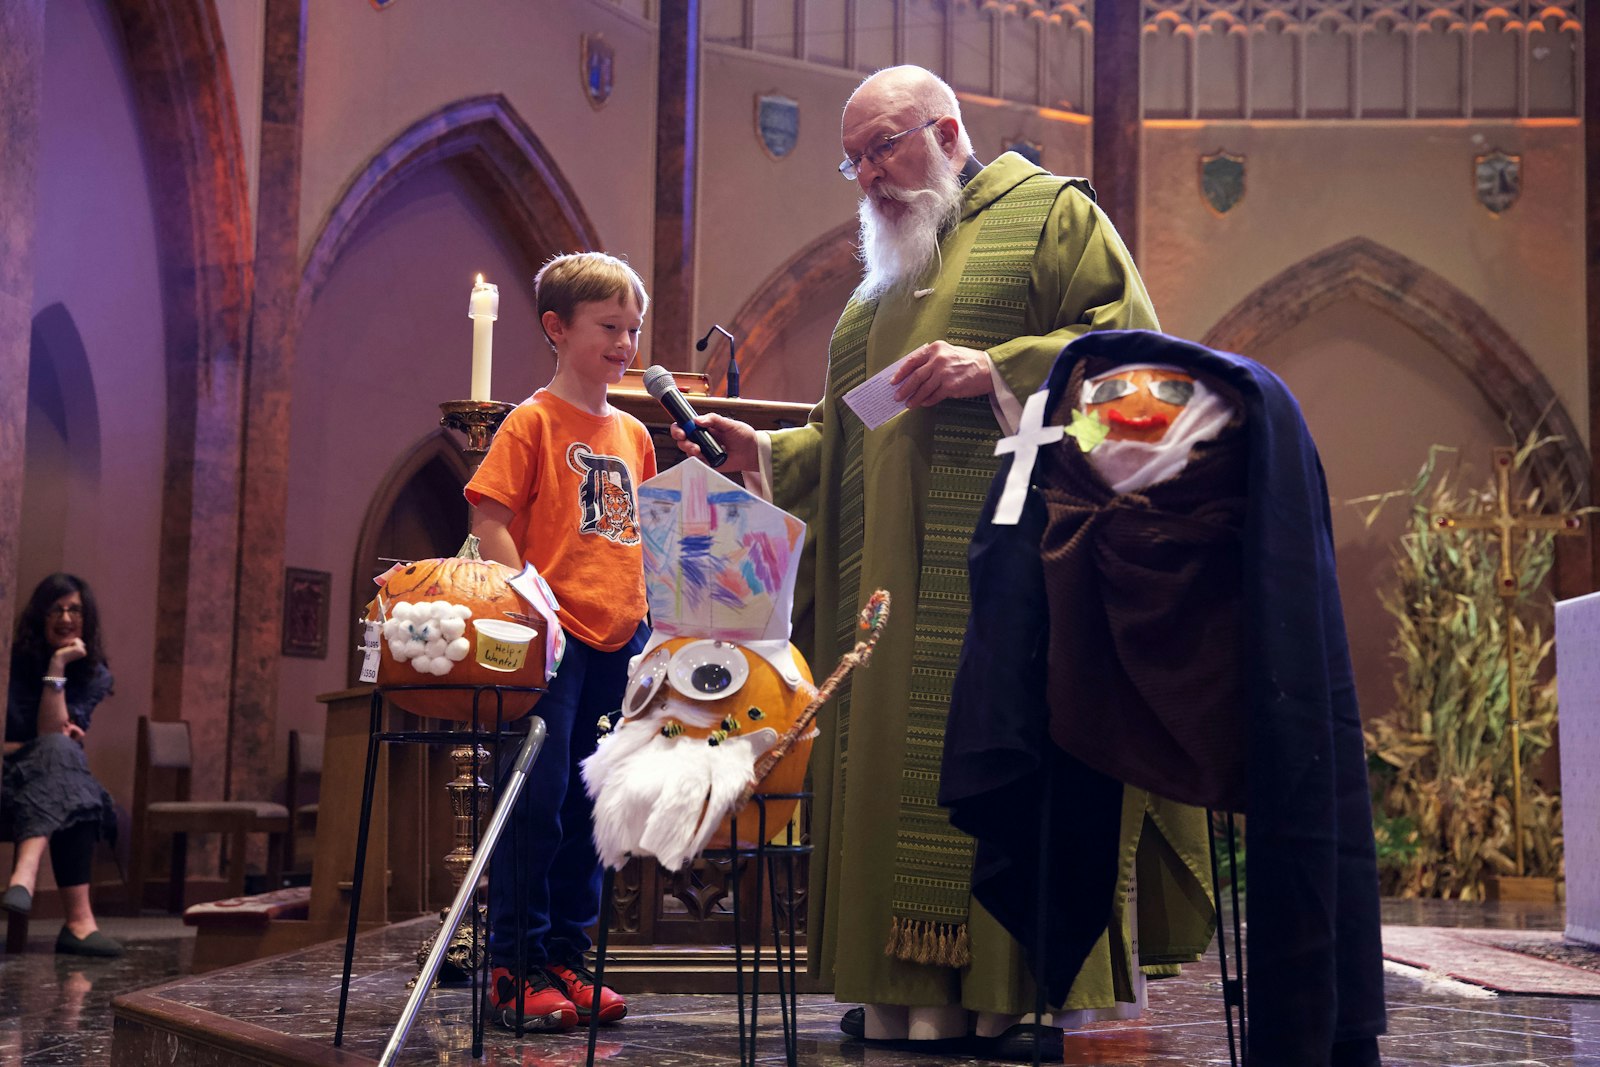 A kindergarten student tells Fr. Tim Pelc about St. Ambrose (center). The students also decorated pumpkins to look like St. John of God (left) and St. Edith Stein (right).